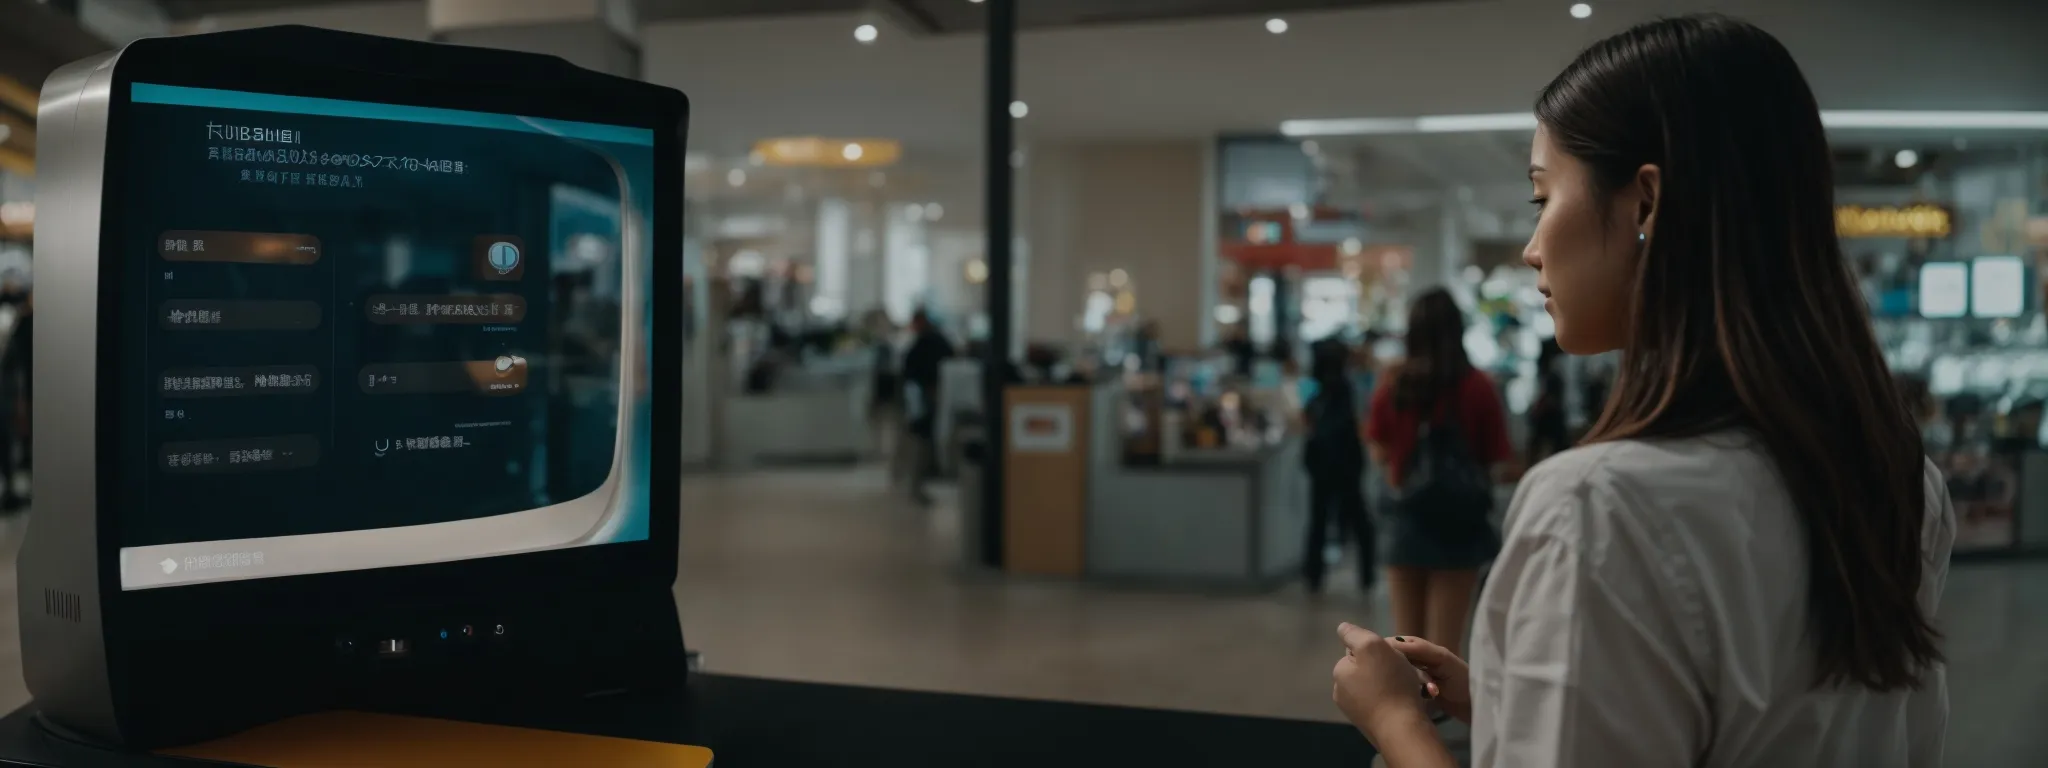 a customer touches an interactive kiosk for assistance while an ai chatbot window pops up on the screen.